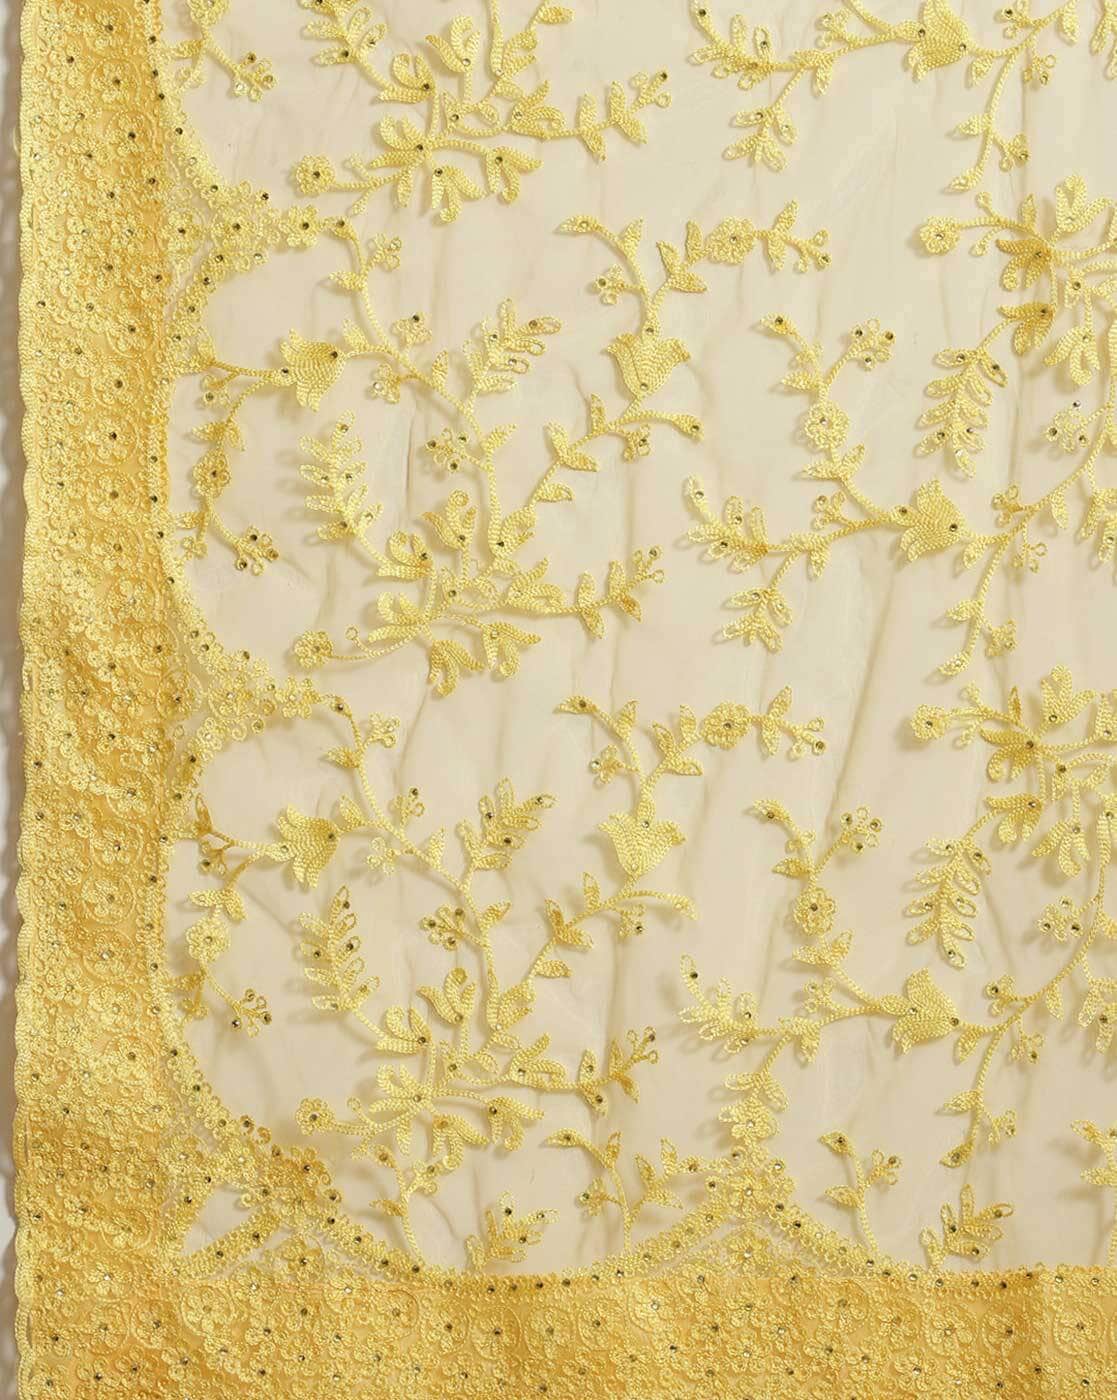 Yellow Colored Beautiful Embroidered Net Saree With Dimond Work